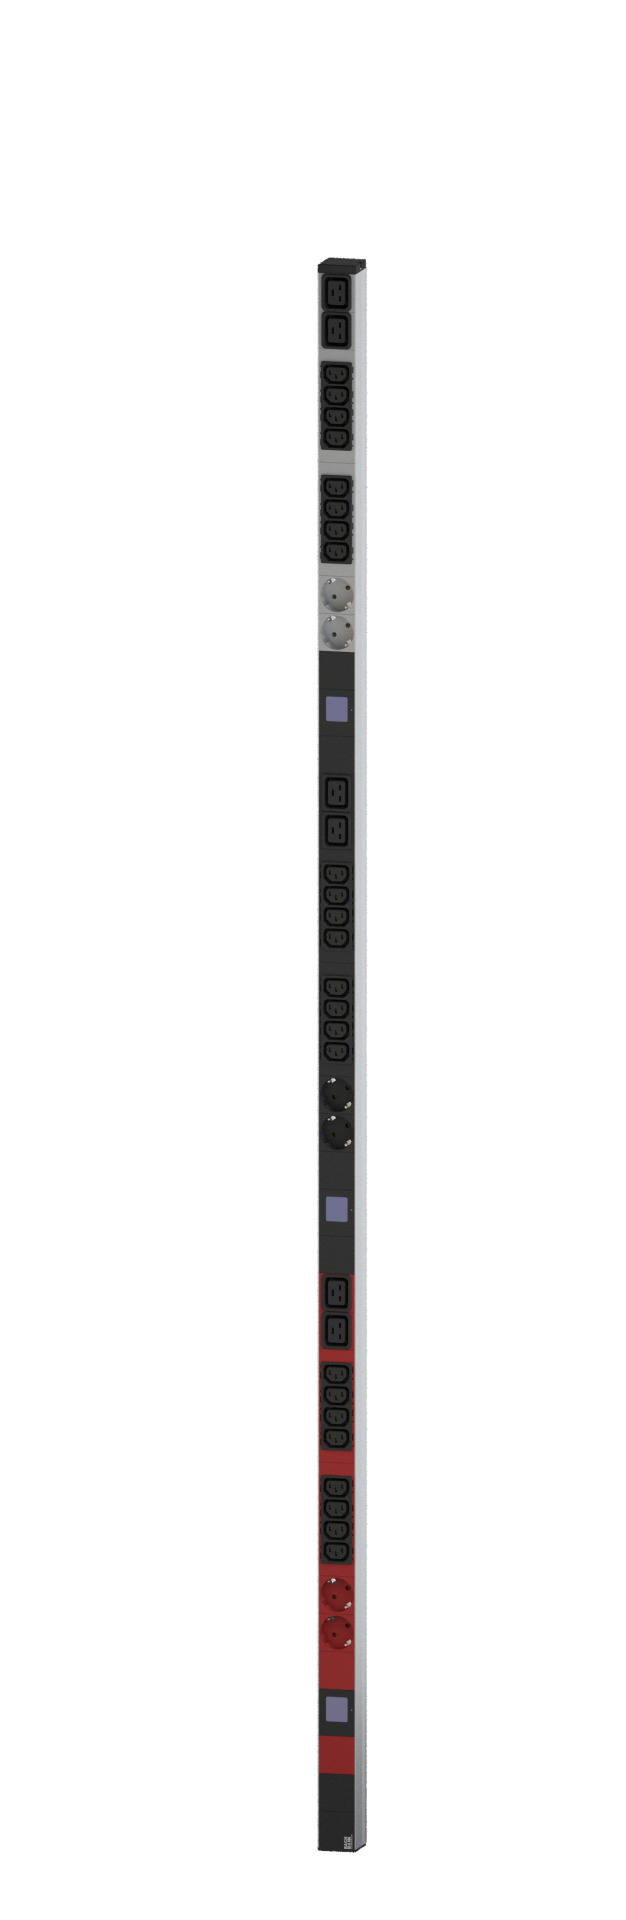 PDU Vertical BN500 24xC13 6xCEE7/3 400V 16A with Power Measuring (Display)